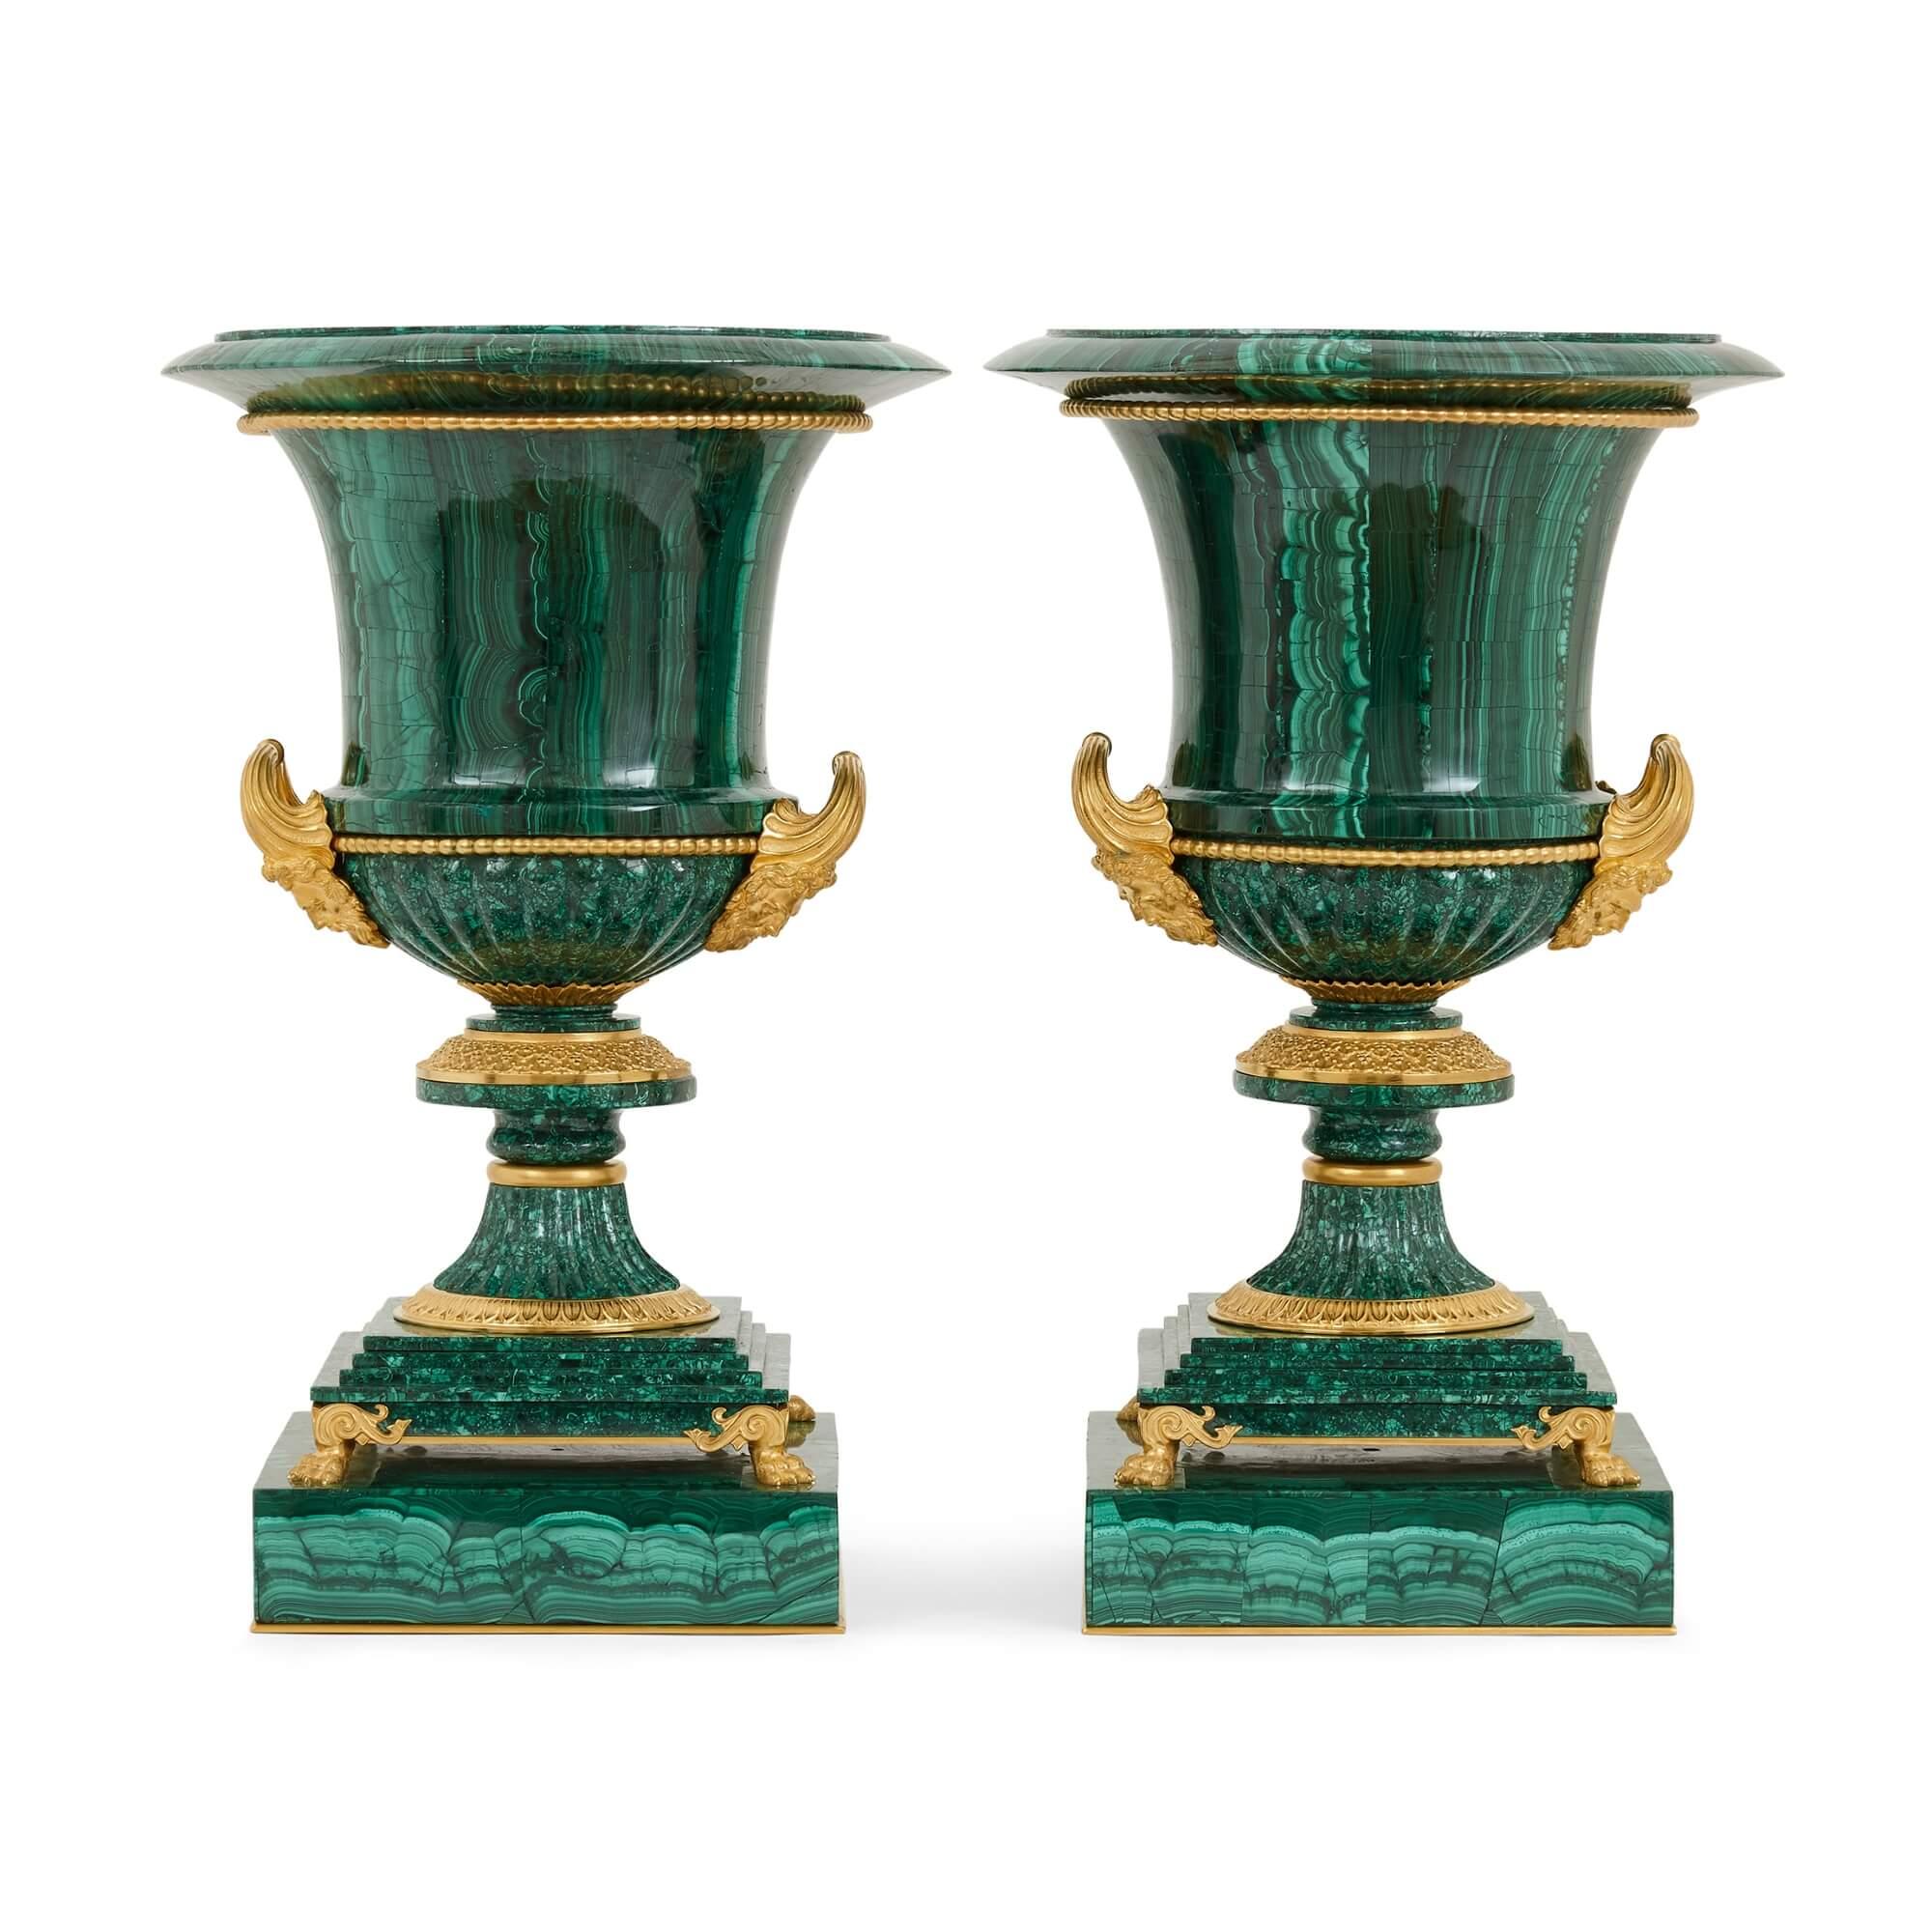 A pair of ormolu mounted malachite Ekaterinburg vases after a design by I.I. Galberg
French, 20th century
Height 51cm, diameter 32cm

Crafted to a design by the prestigious architect and craftsman Ivan Ivanovich Galberg, the Imperial Court architect